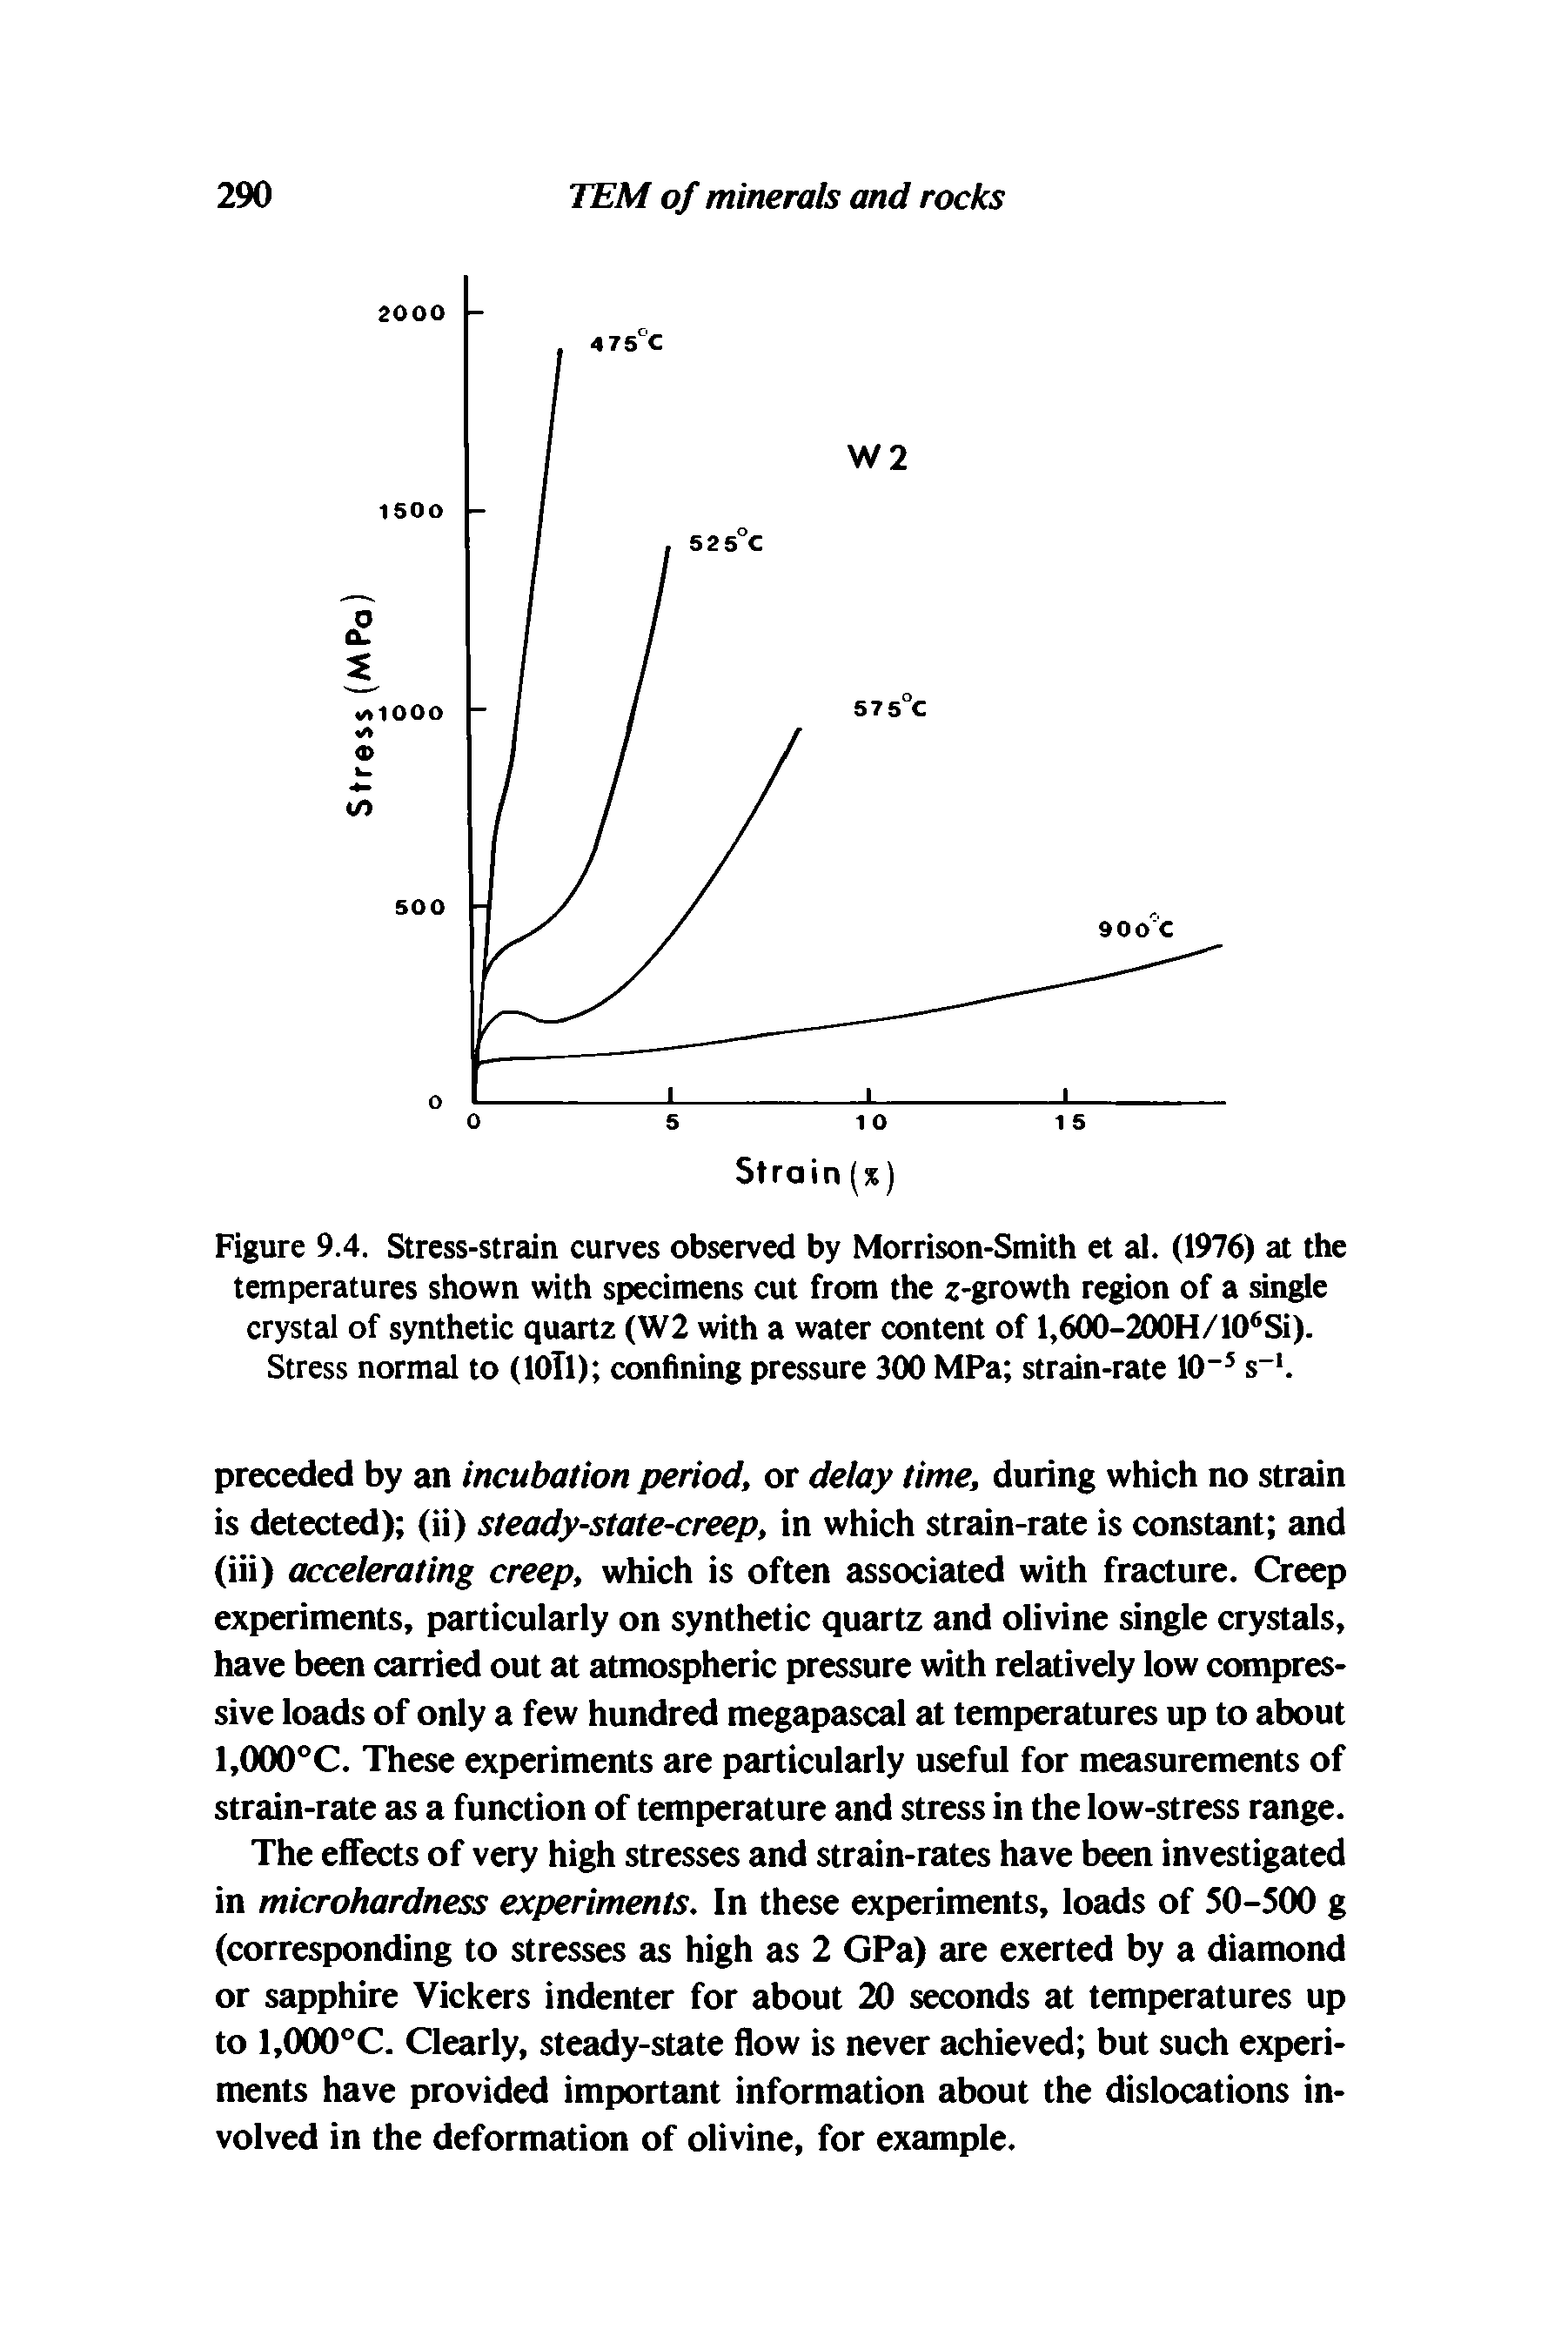 Figure 9.4. Stress-strain curves observed by Morrison-Smith et al. (1976) at the temperatures shown with specimens cut from the z-growth region of a single crystal of synthetic quartz (W2 with a water content of l,600-200H/10 Si). Stress normal to (lOTl) confining pressure 300 MPa strain-rate 10 s .